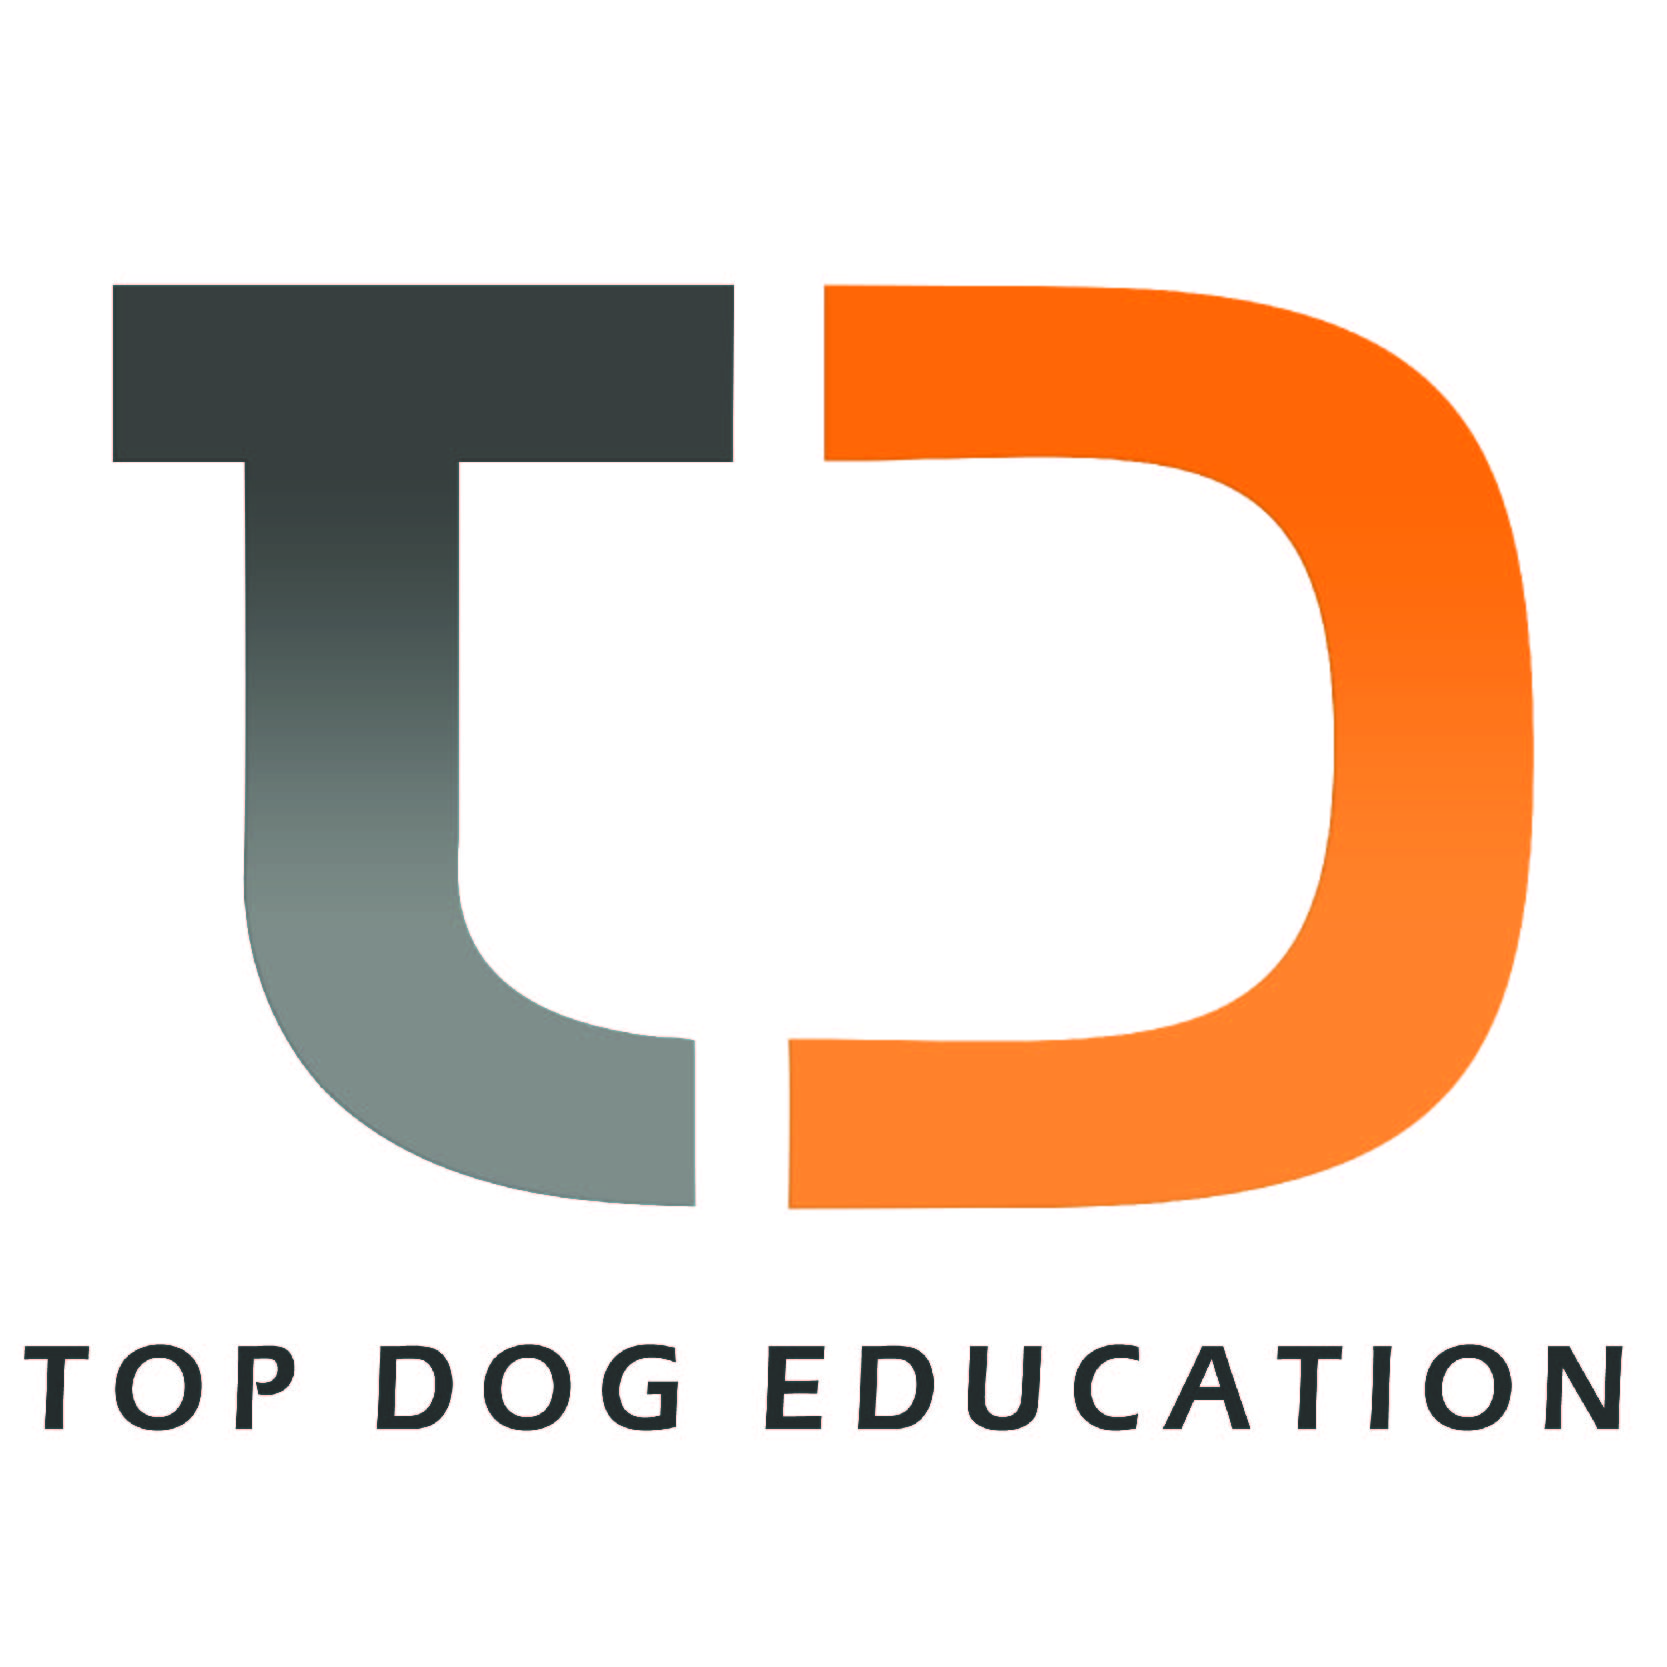 Top Dog Education